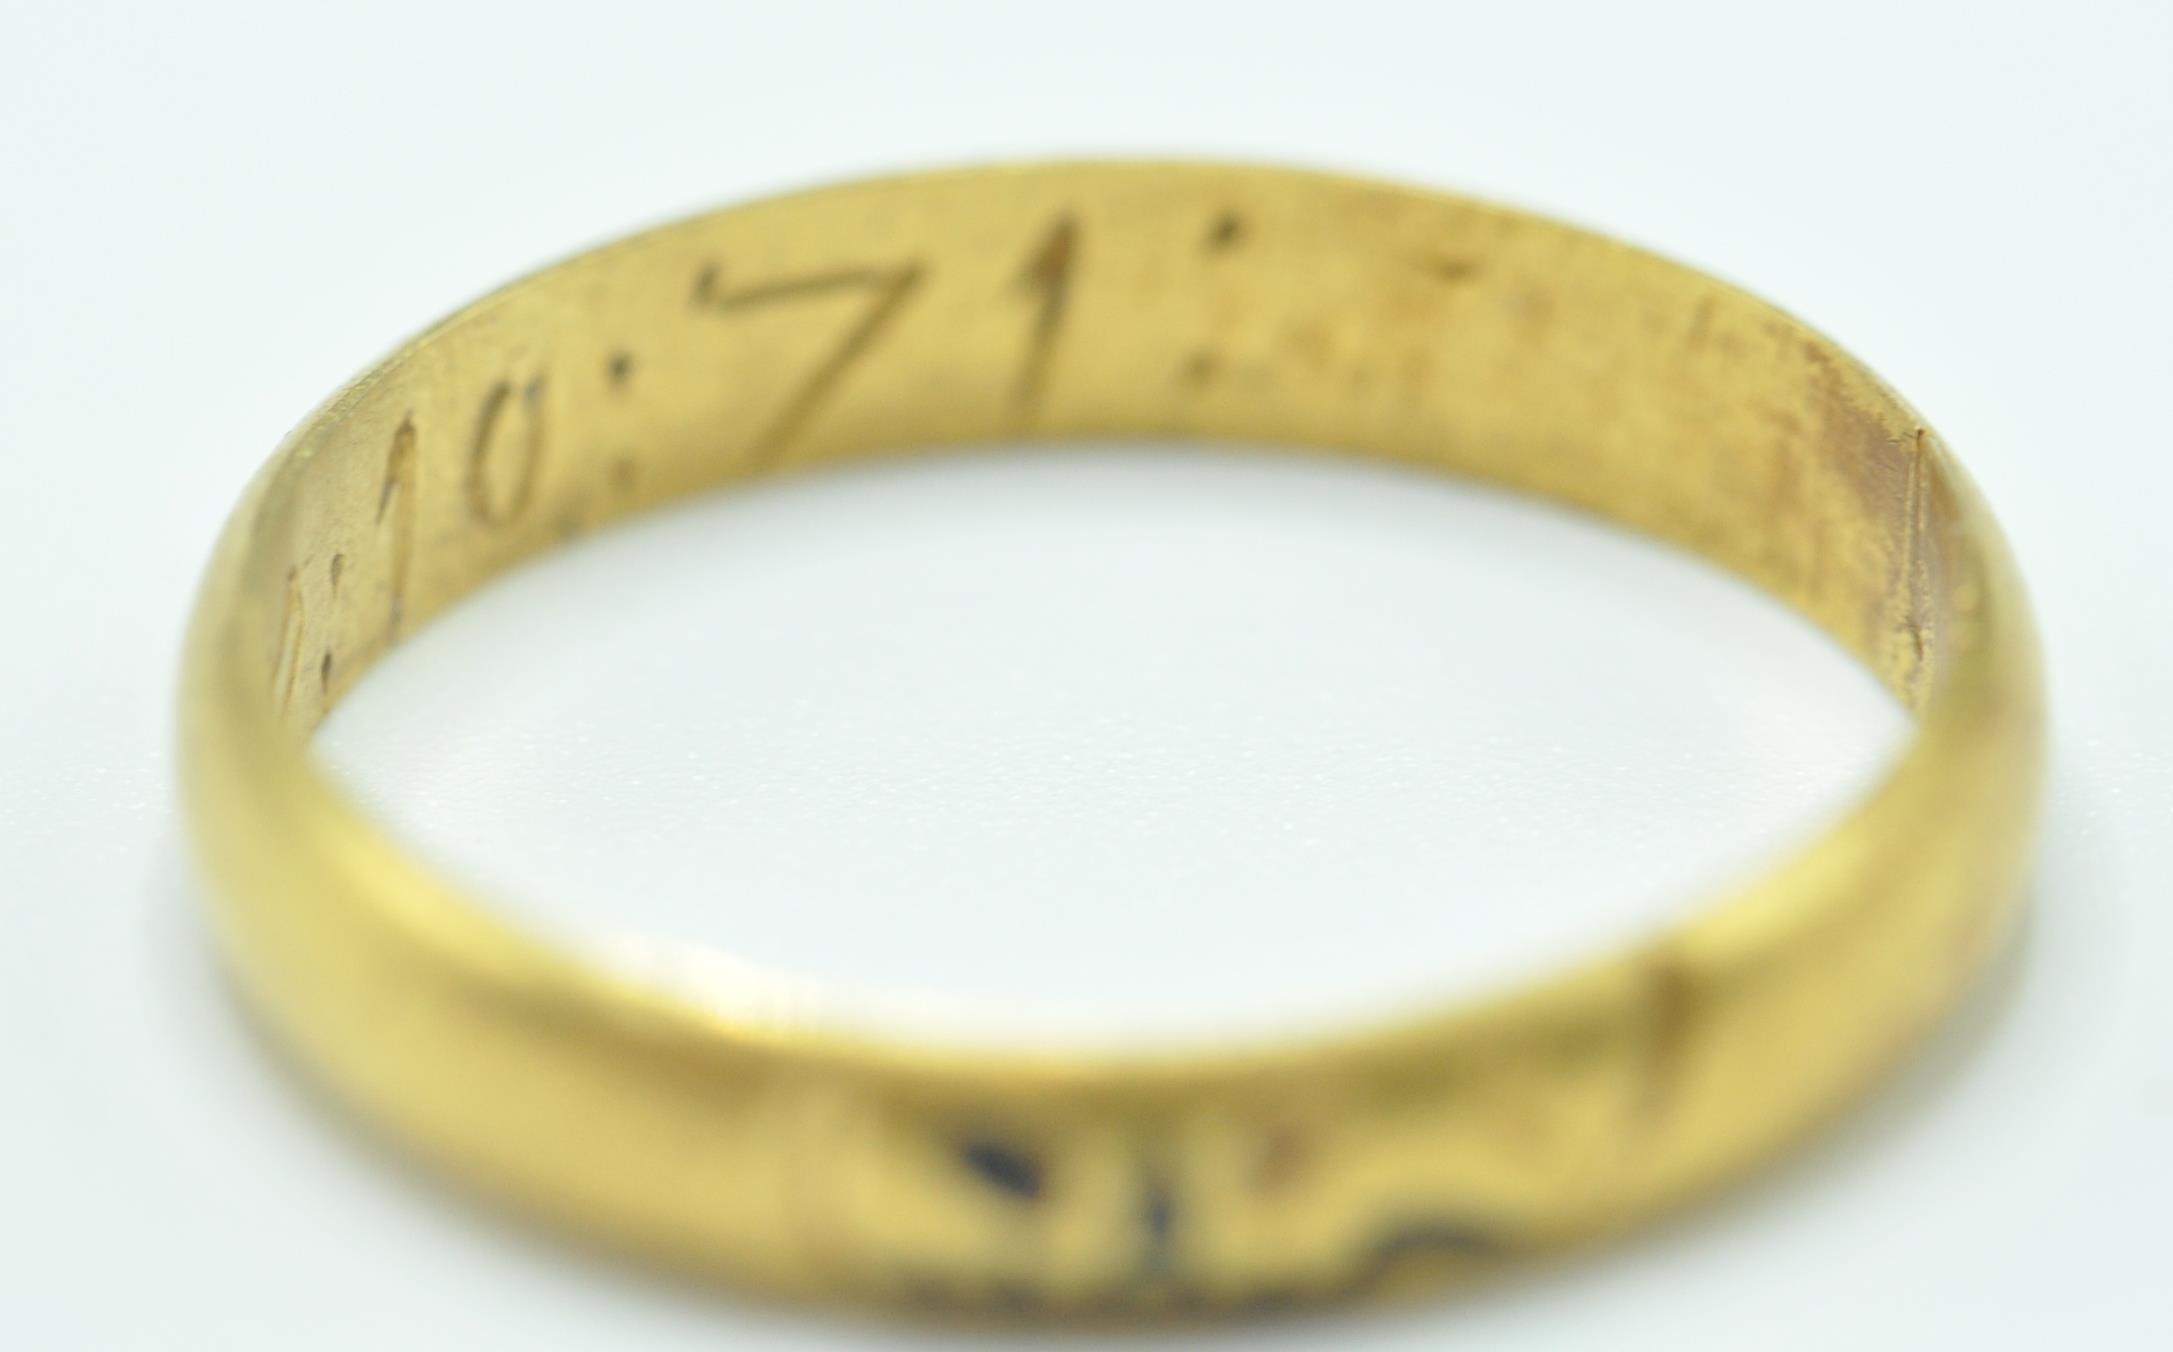 GEORGIAN GOLD MOMENTRO MORI MOURNING RING WITH SKULL - Image 9 of 9